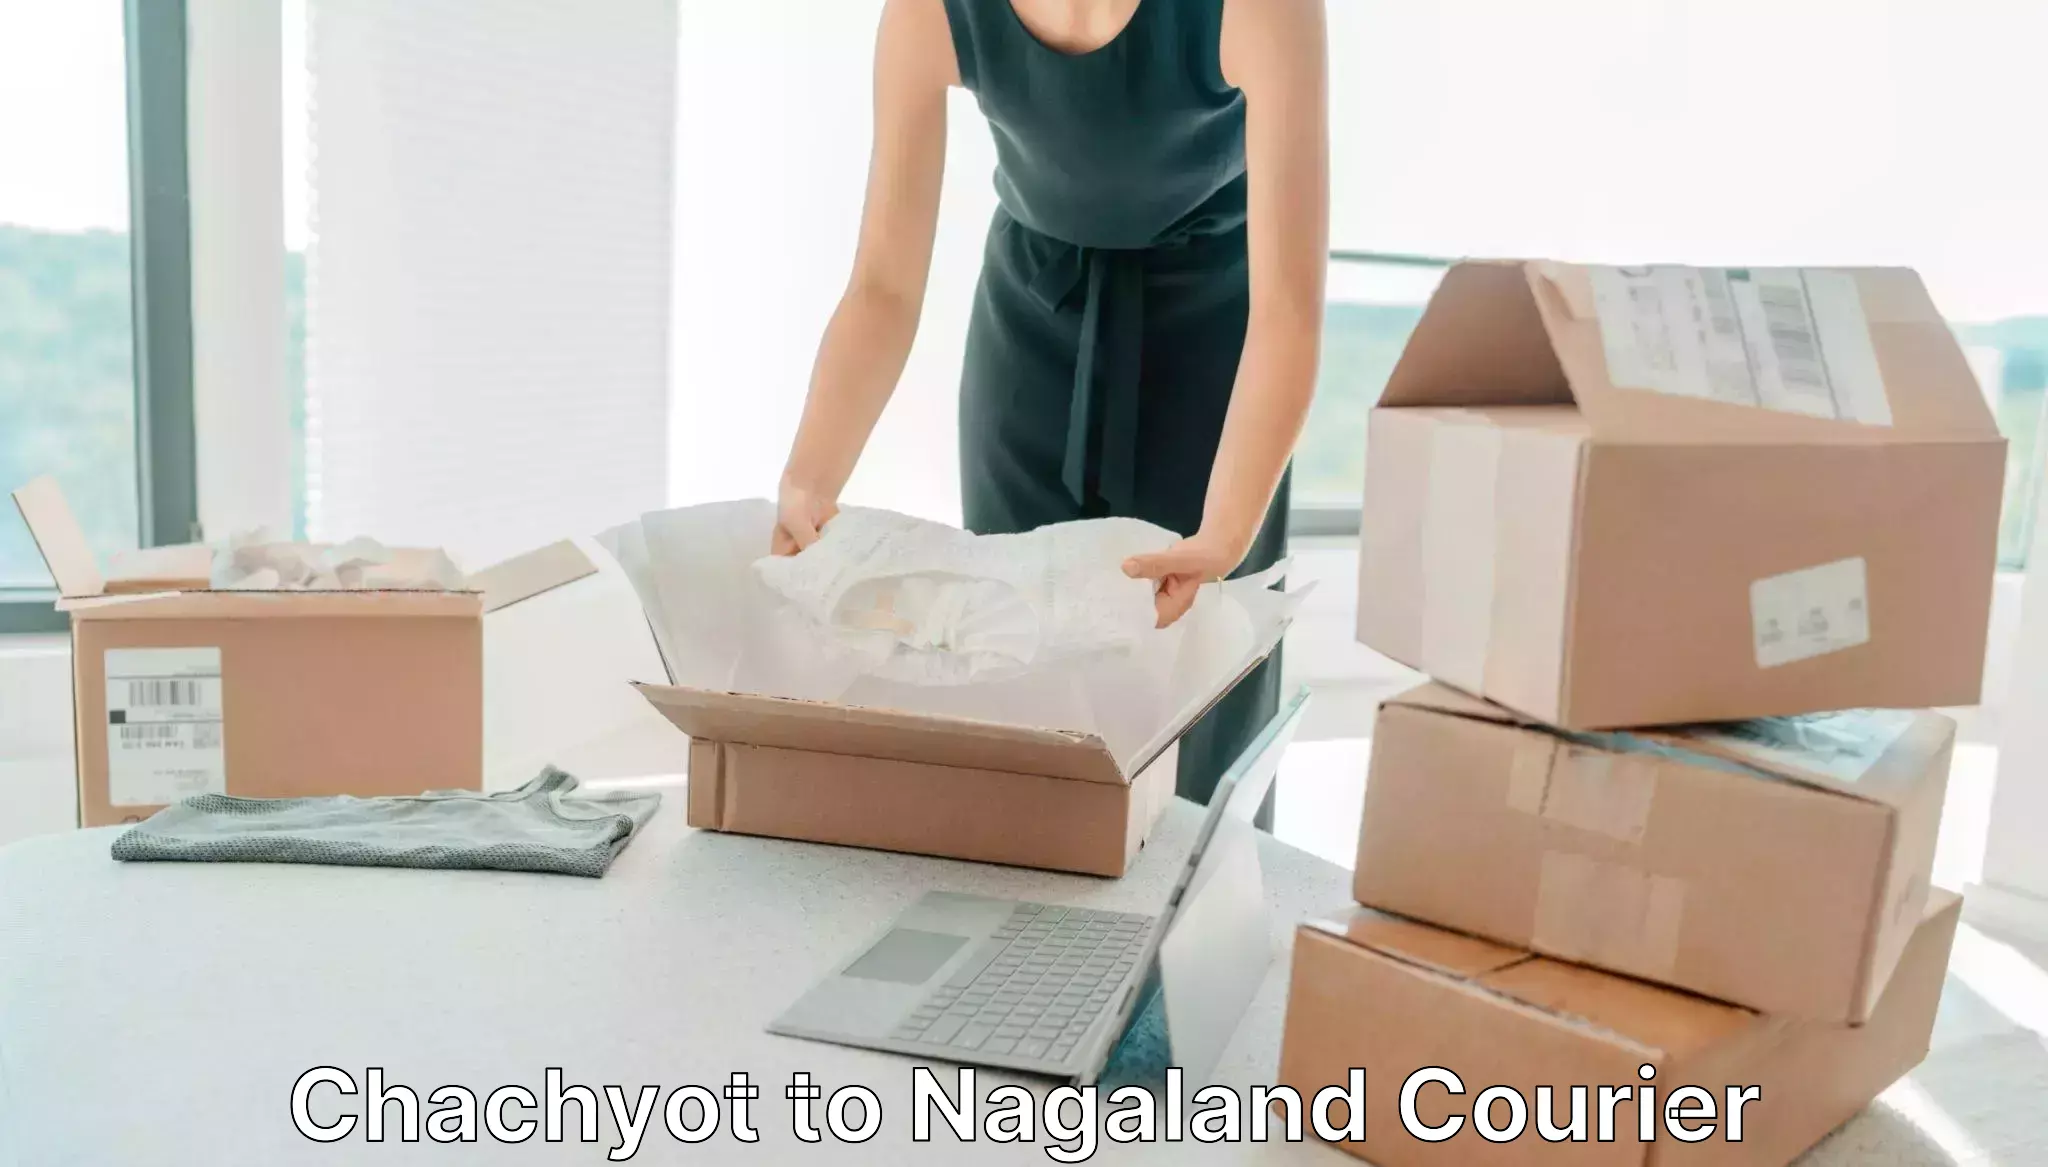 Reliable delivery network Chachyot to Nagaland